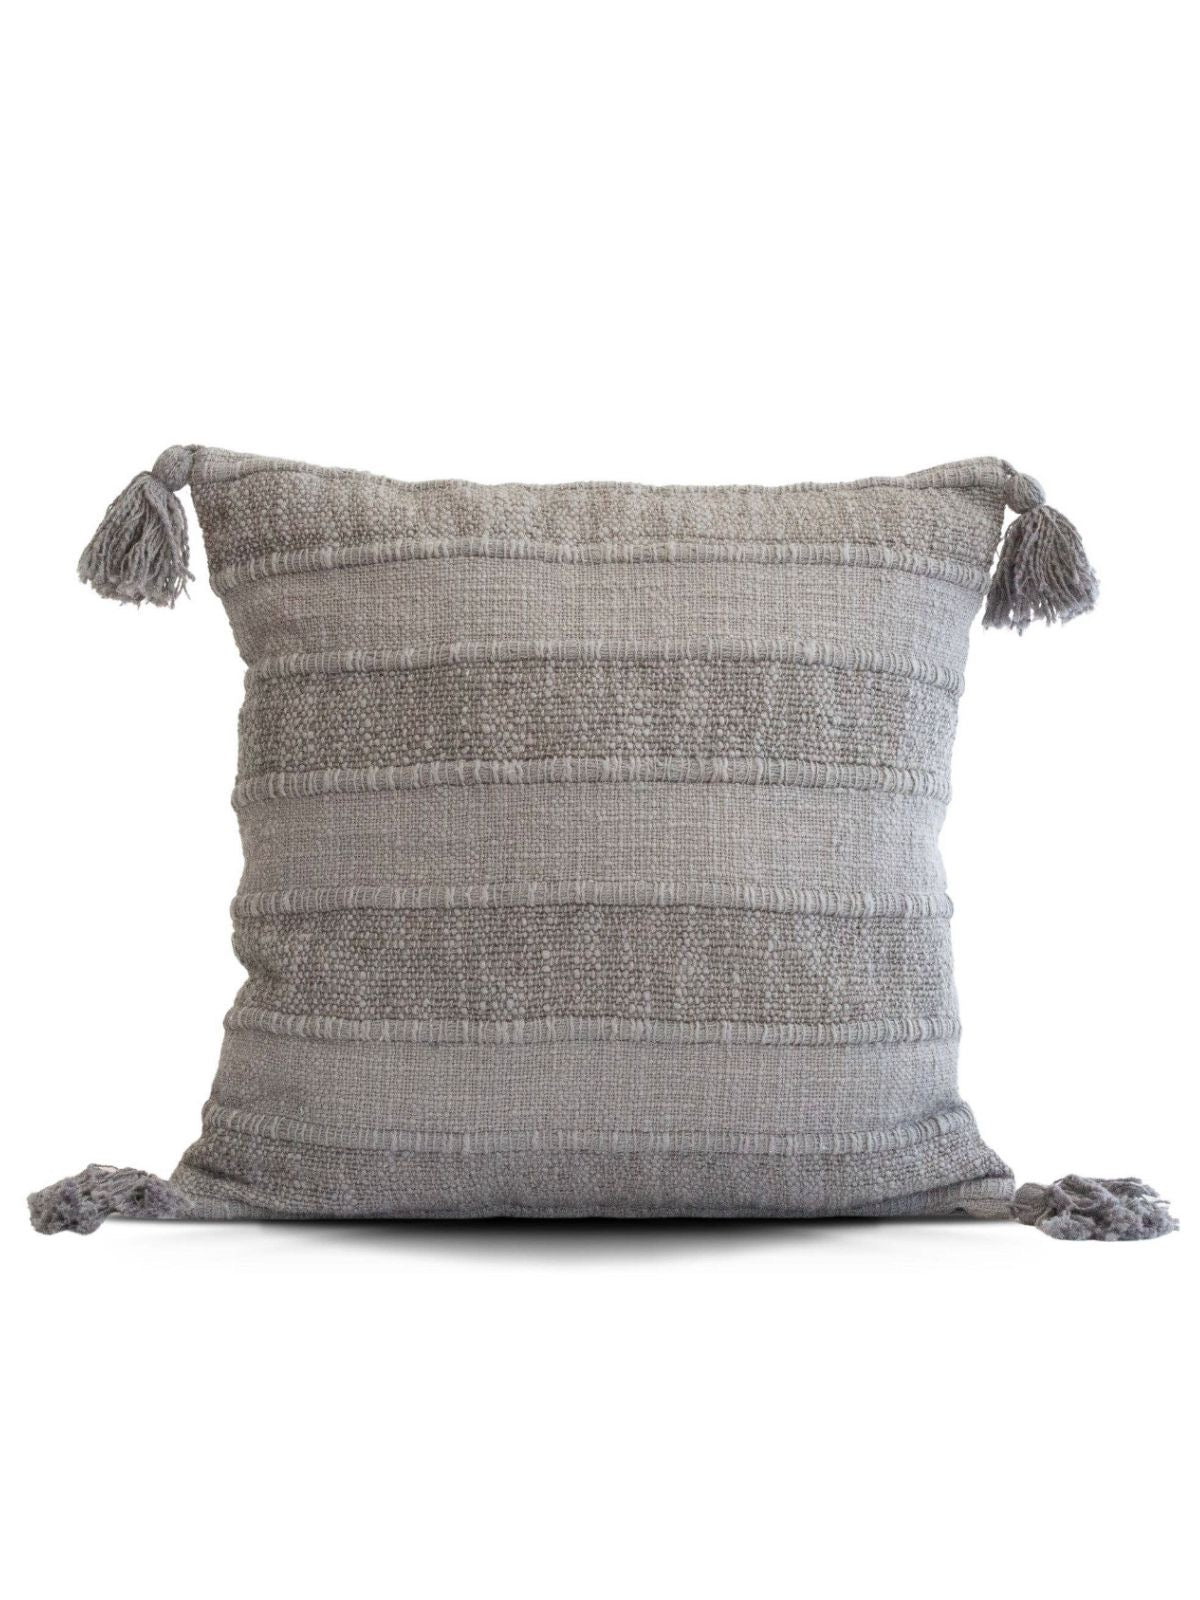 This 100% Cotton Wide Striped Pillow Cover with pom pom tassels measures 18x18 has a soft linen texture that will add a boho yet modern touch to any space. Available in 2 colors, Sold by KYA Home Decor    